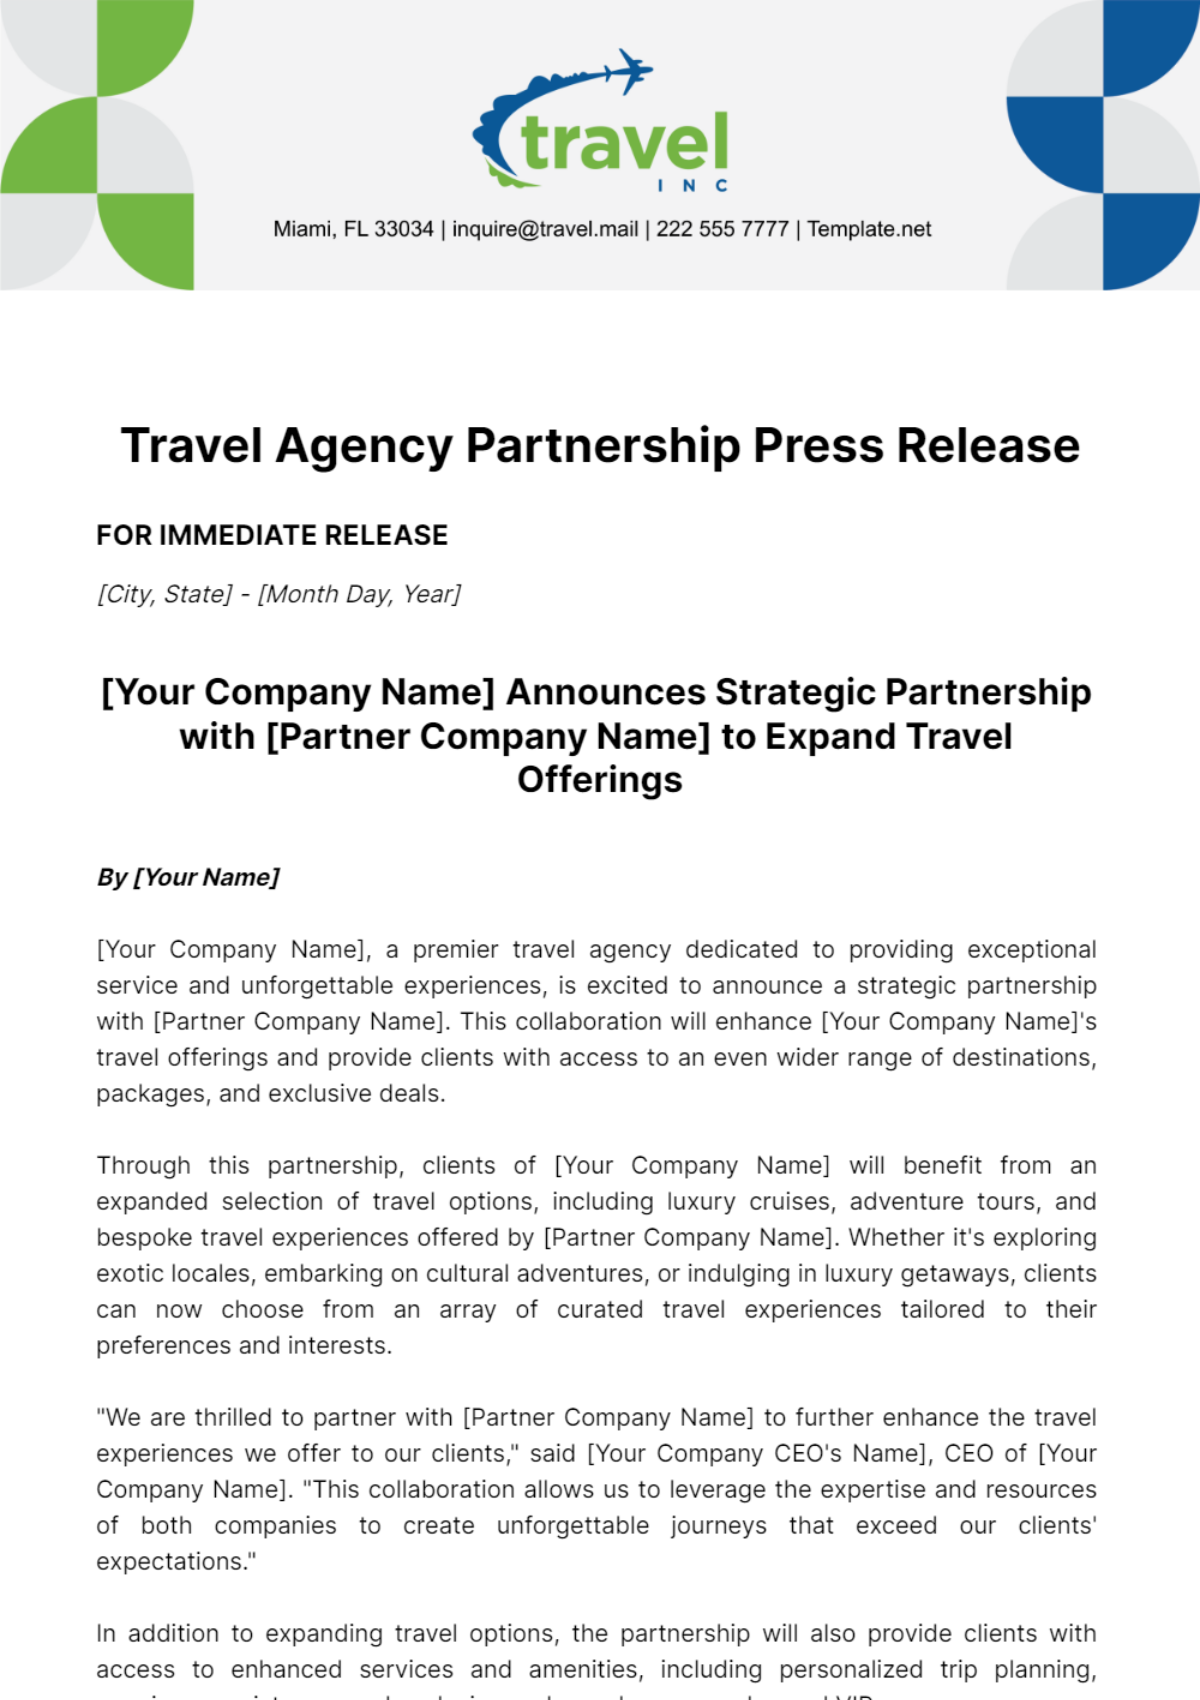 Free Travel Agency Partnership Press Release Template